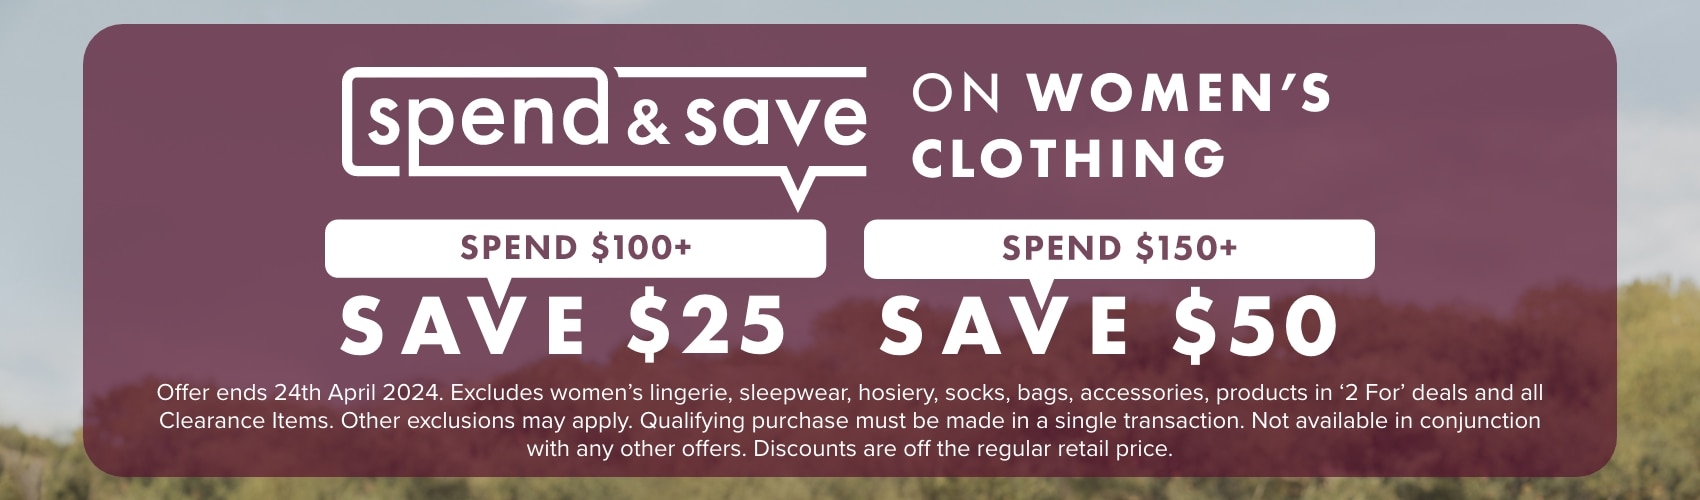 Spend & Save on Women's Clothing 